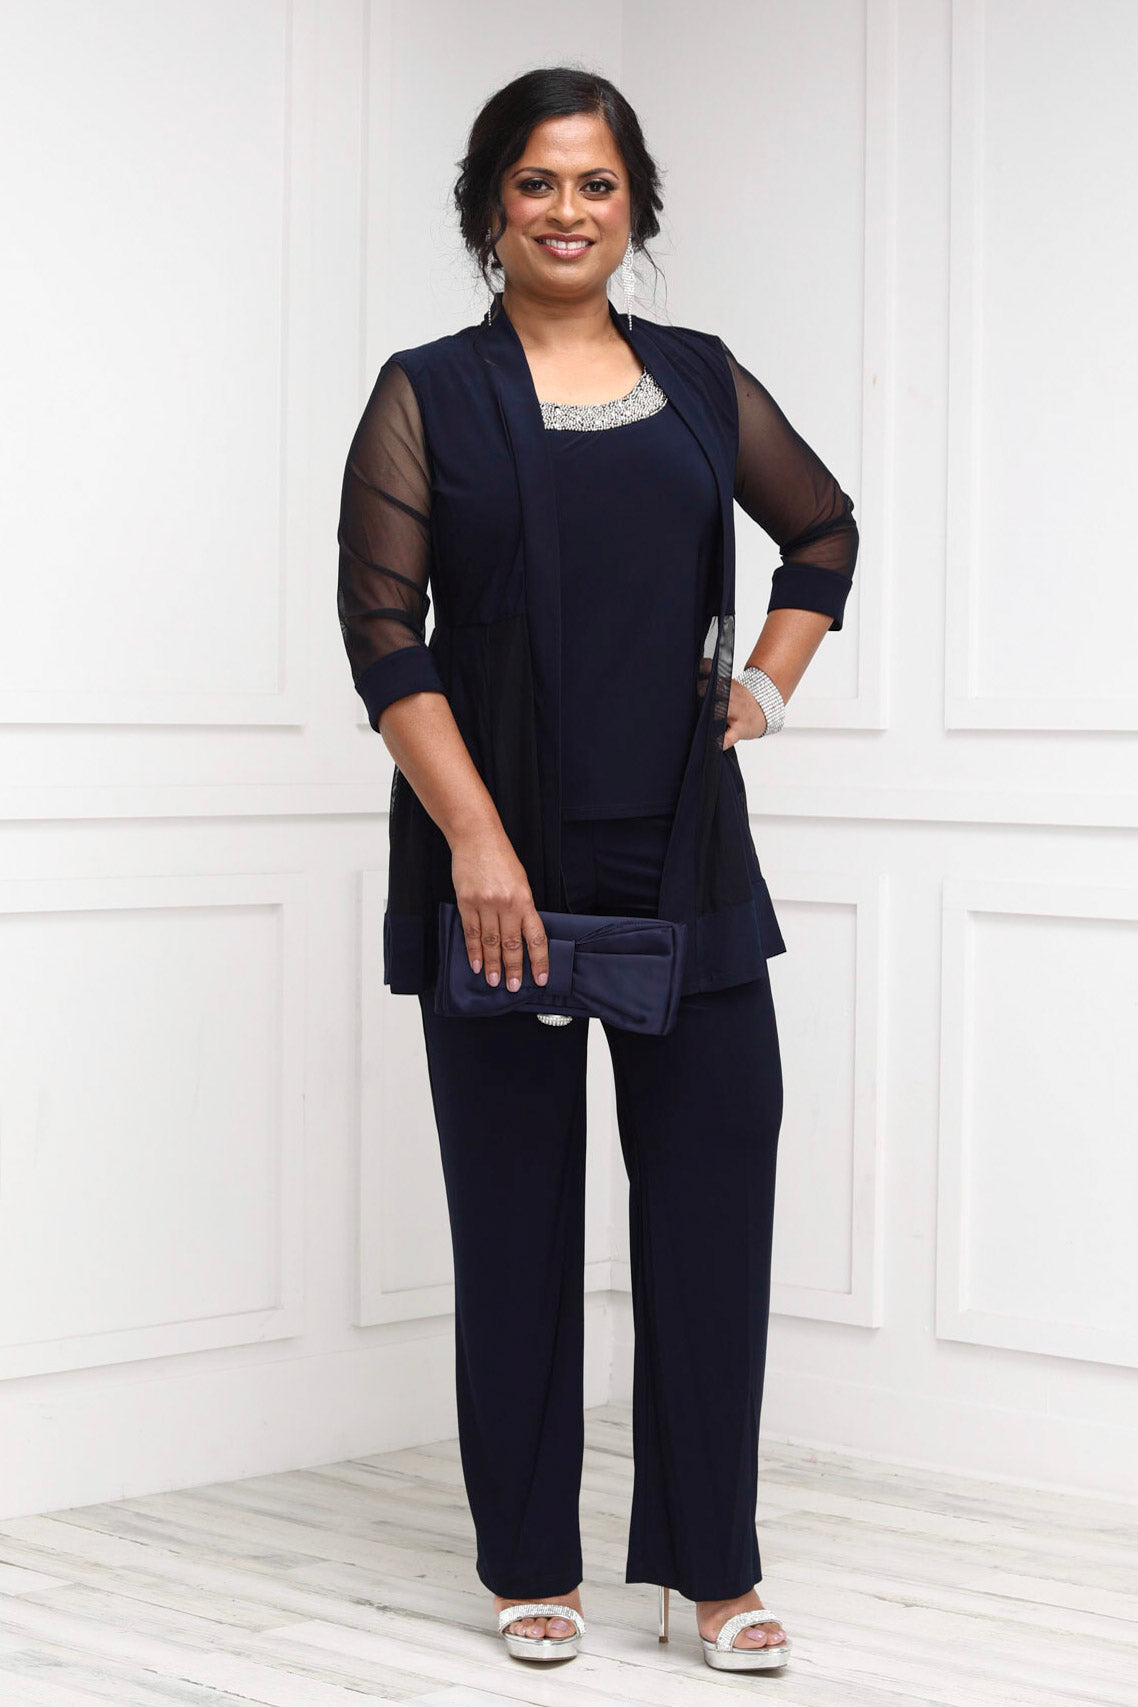 Elegant Plus Size Chiffon Pant Suits for Mother of the Bride with Jacket -  Wedding Guest Outfit